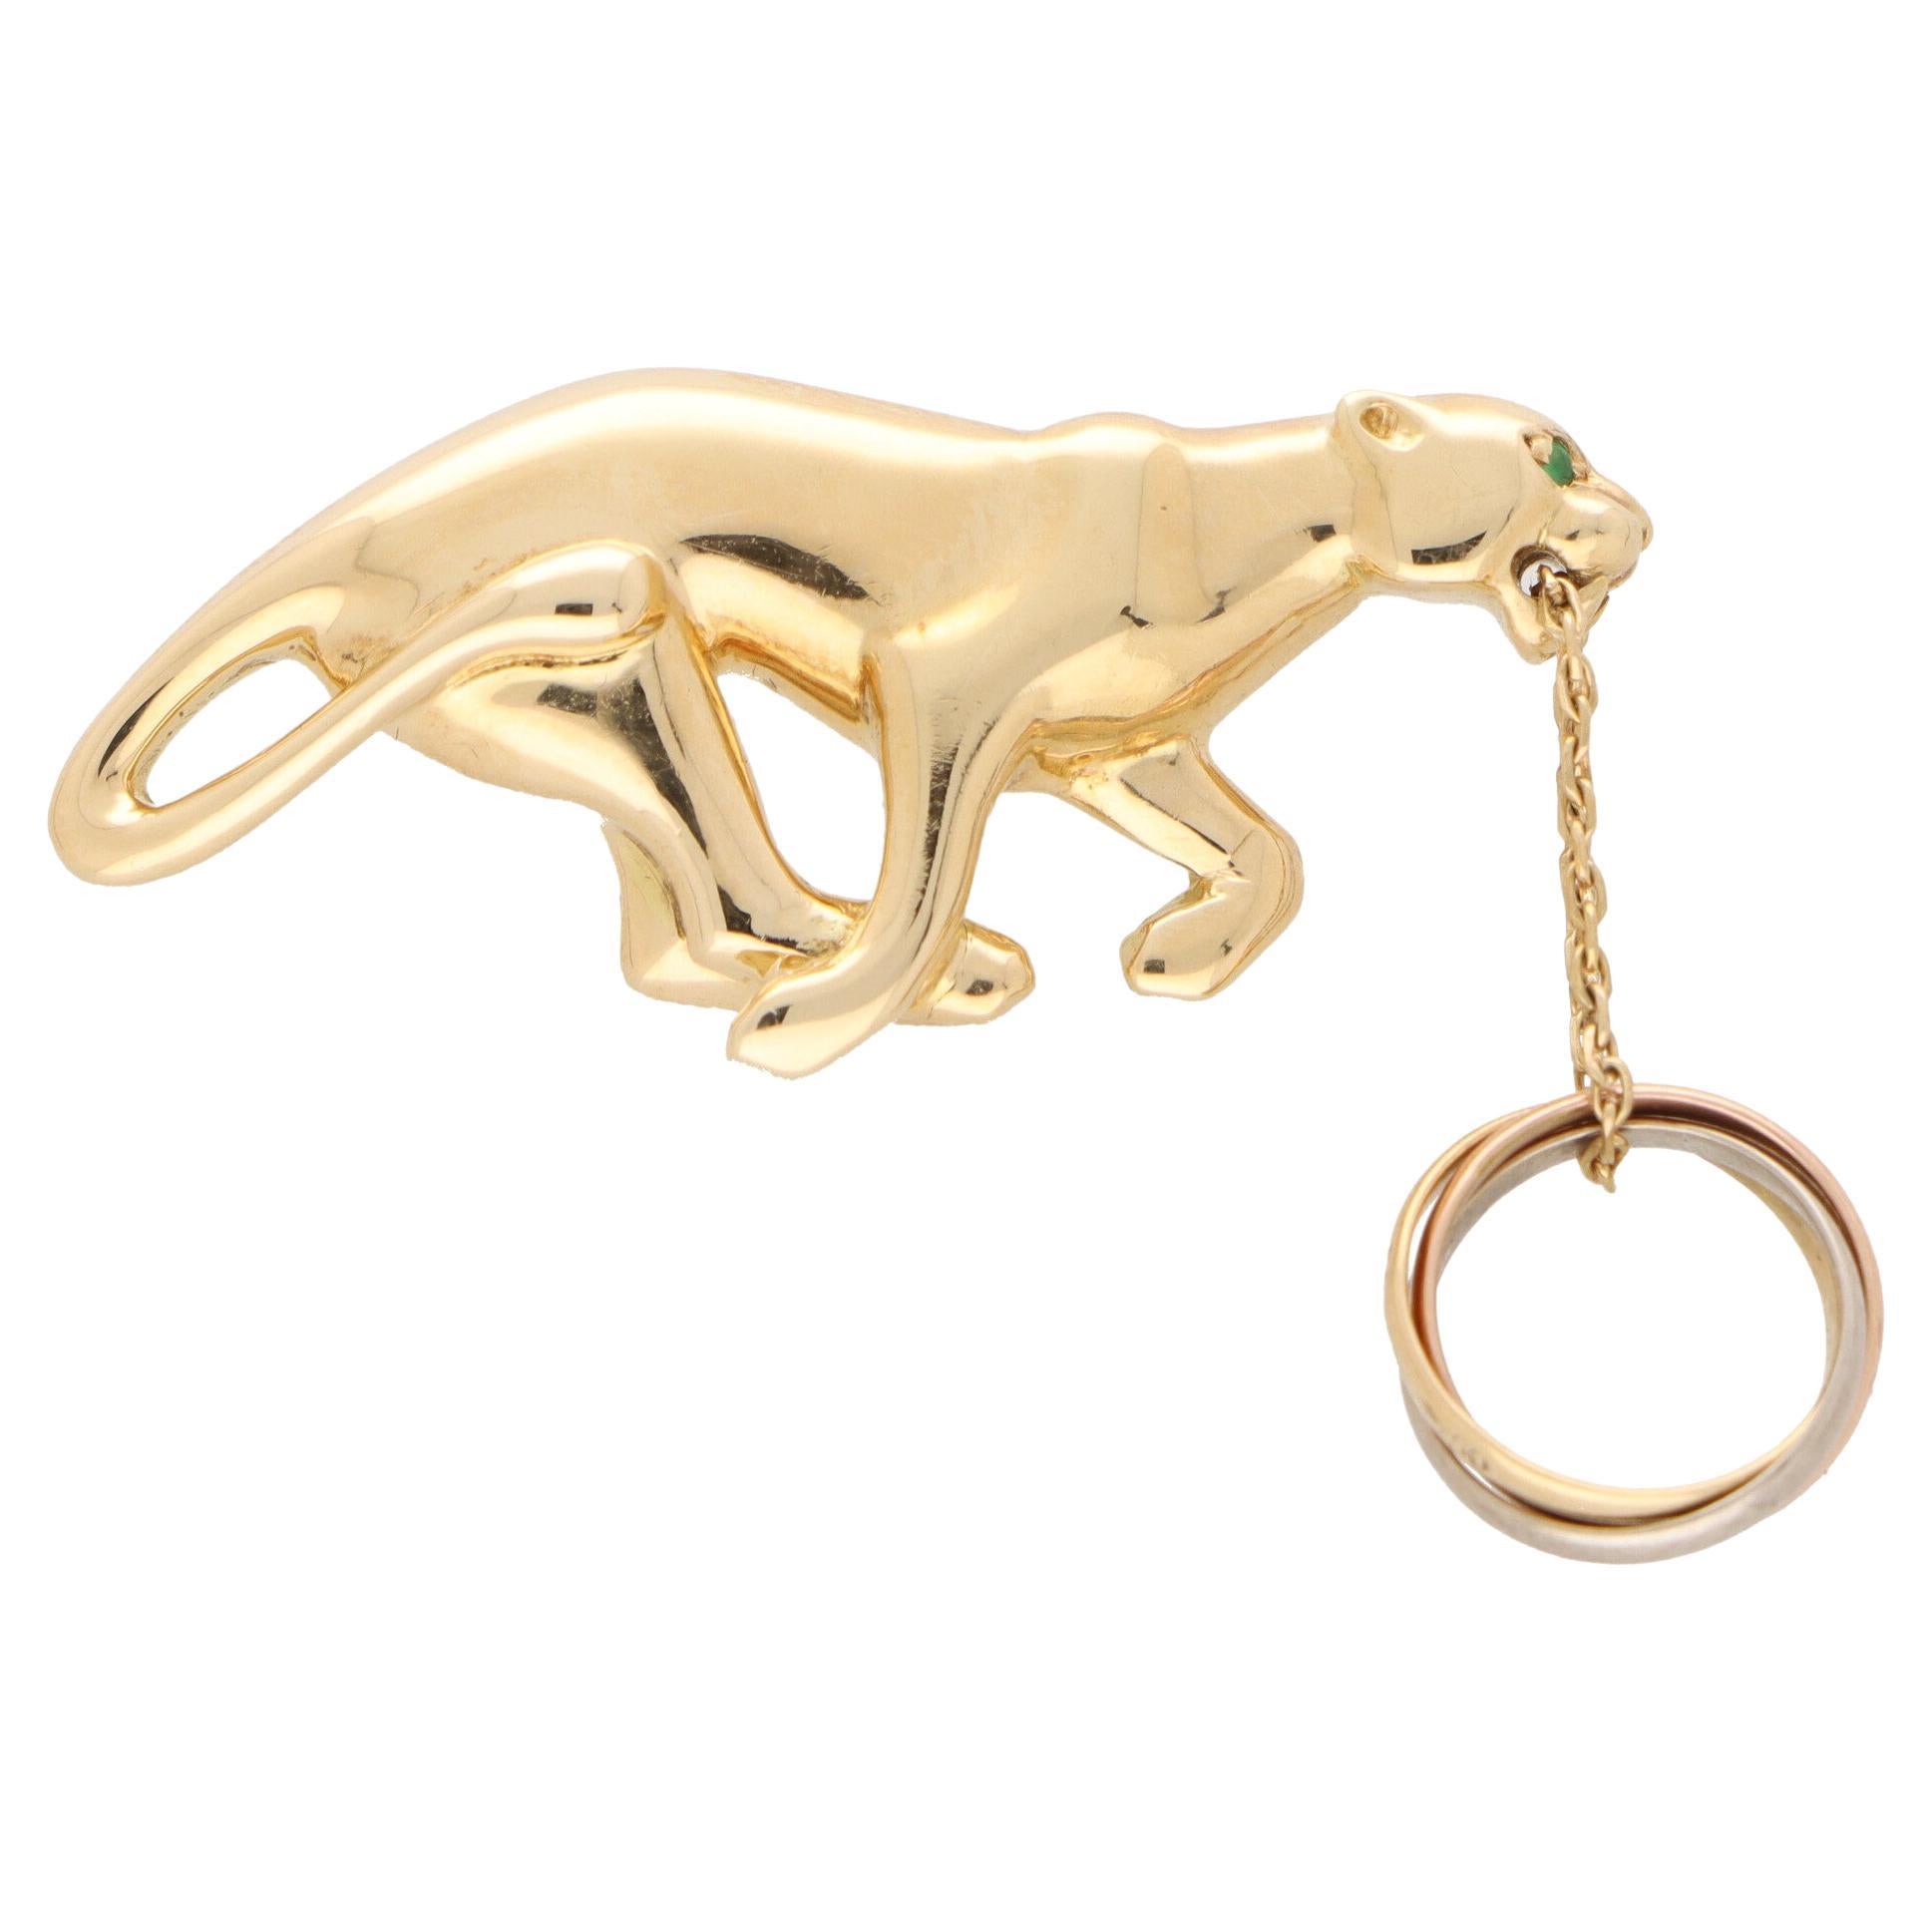 Vintage Cartier Trinity Running Panther Brooch in 18k Yellow Gold